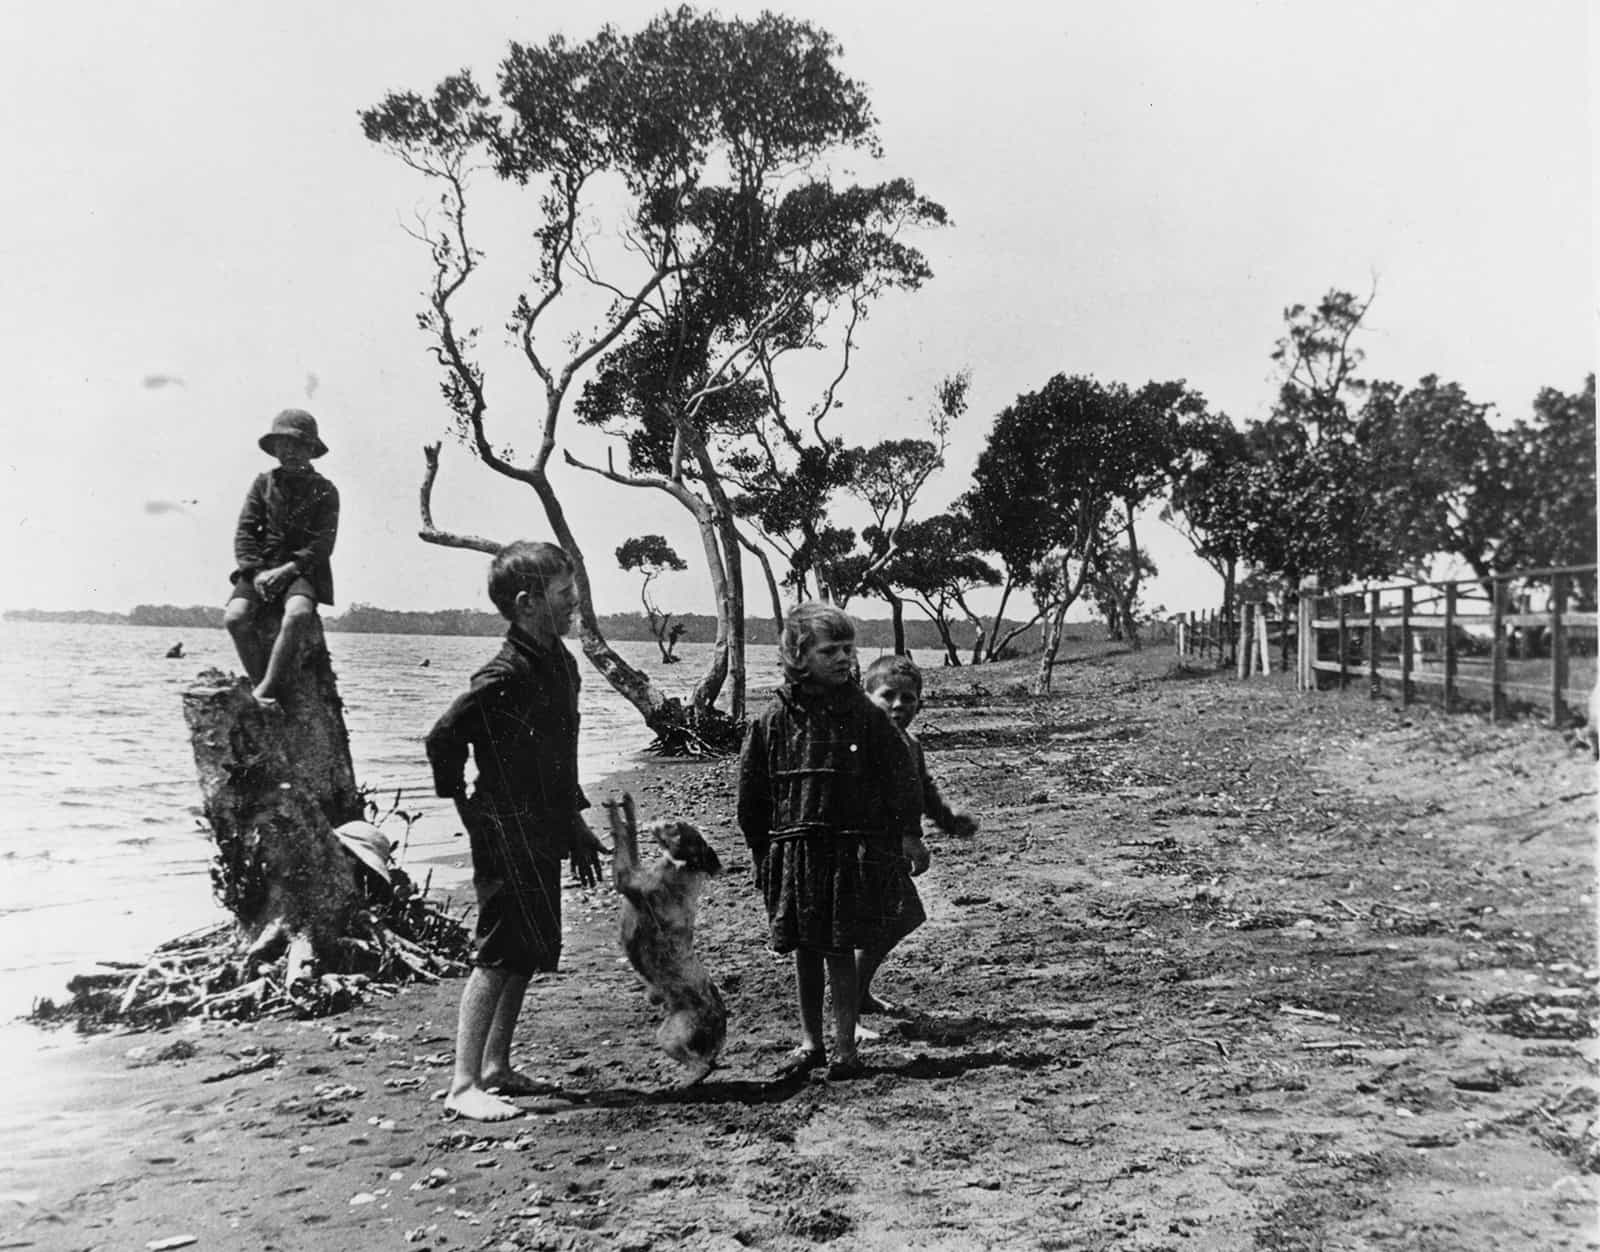 An historical photo of the beach at Cribb Island | Lost Island Remembered